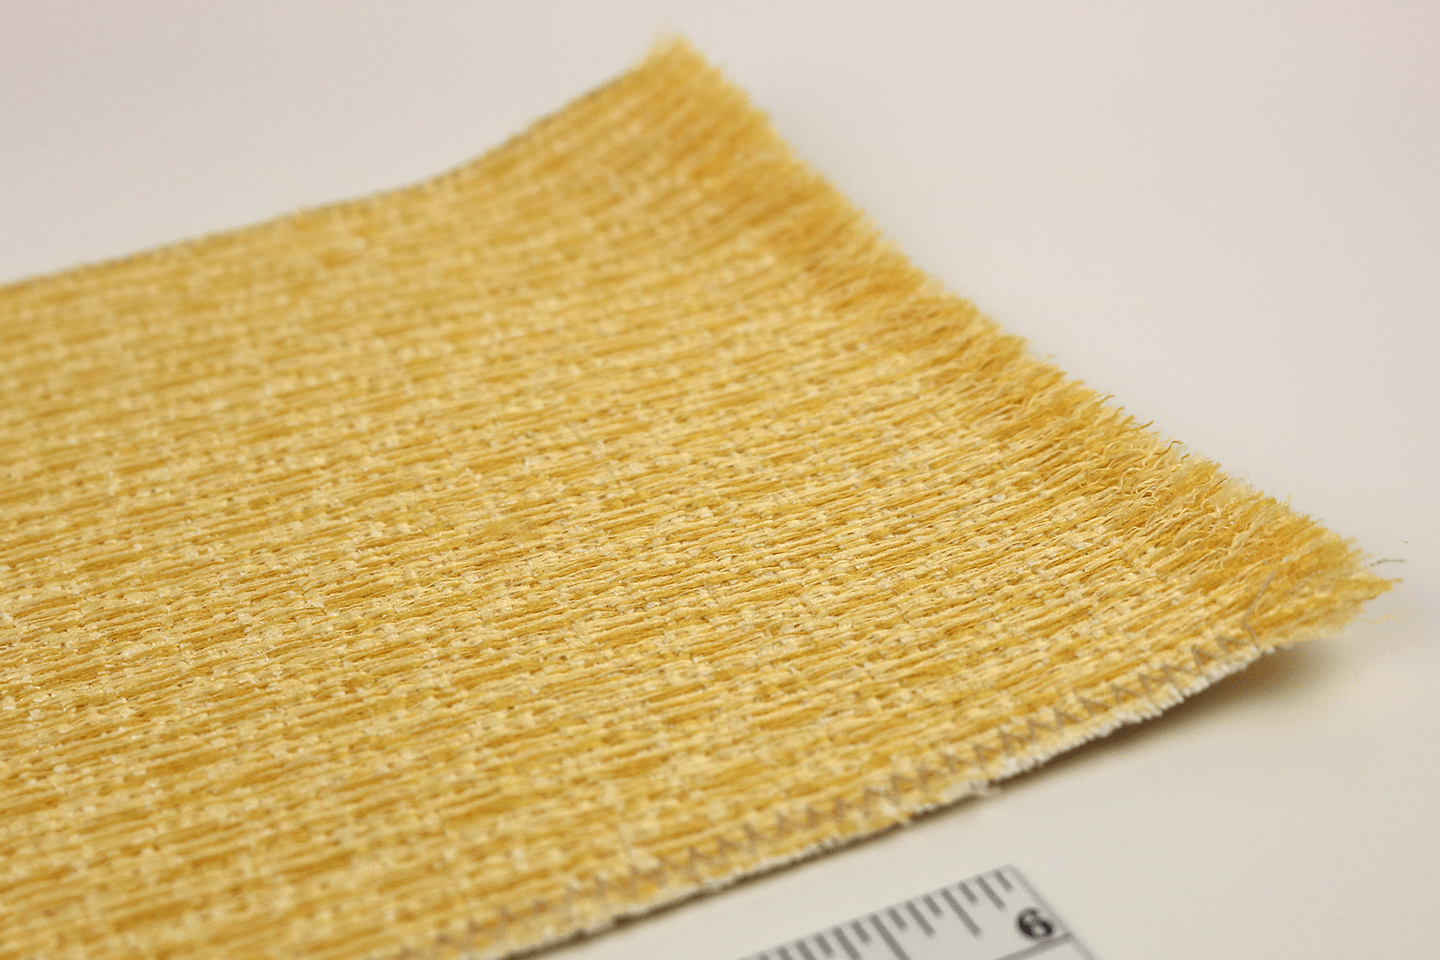 Woven Gold Rug with Fringe